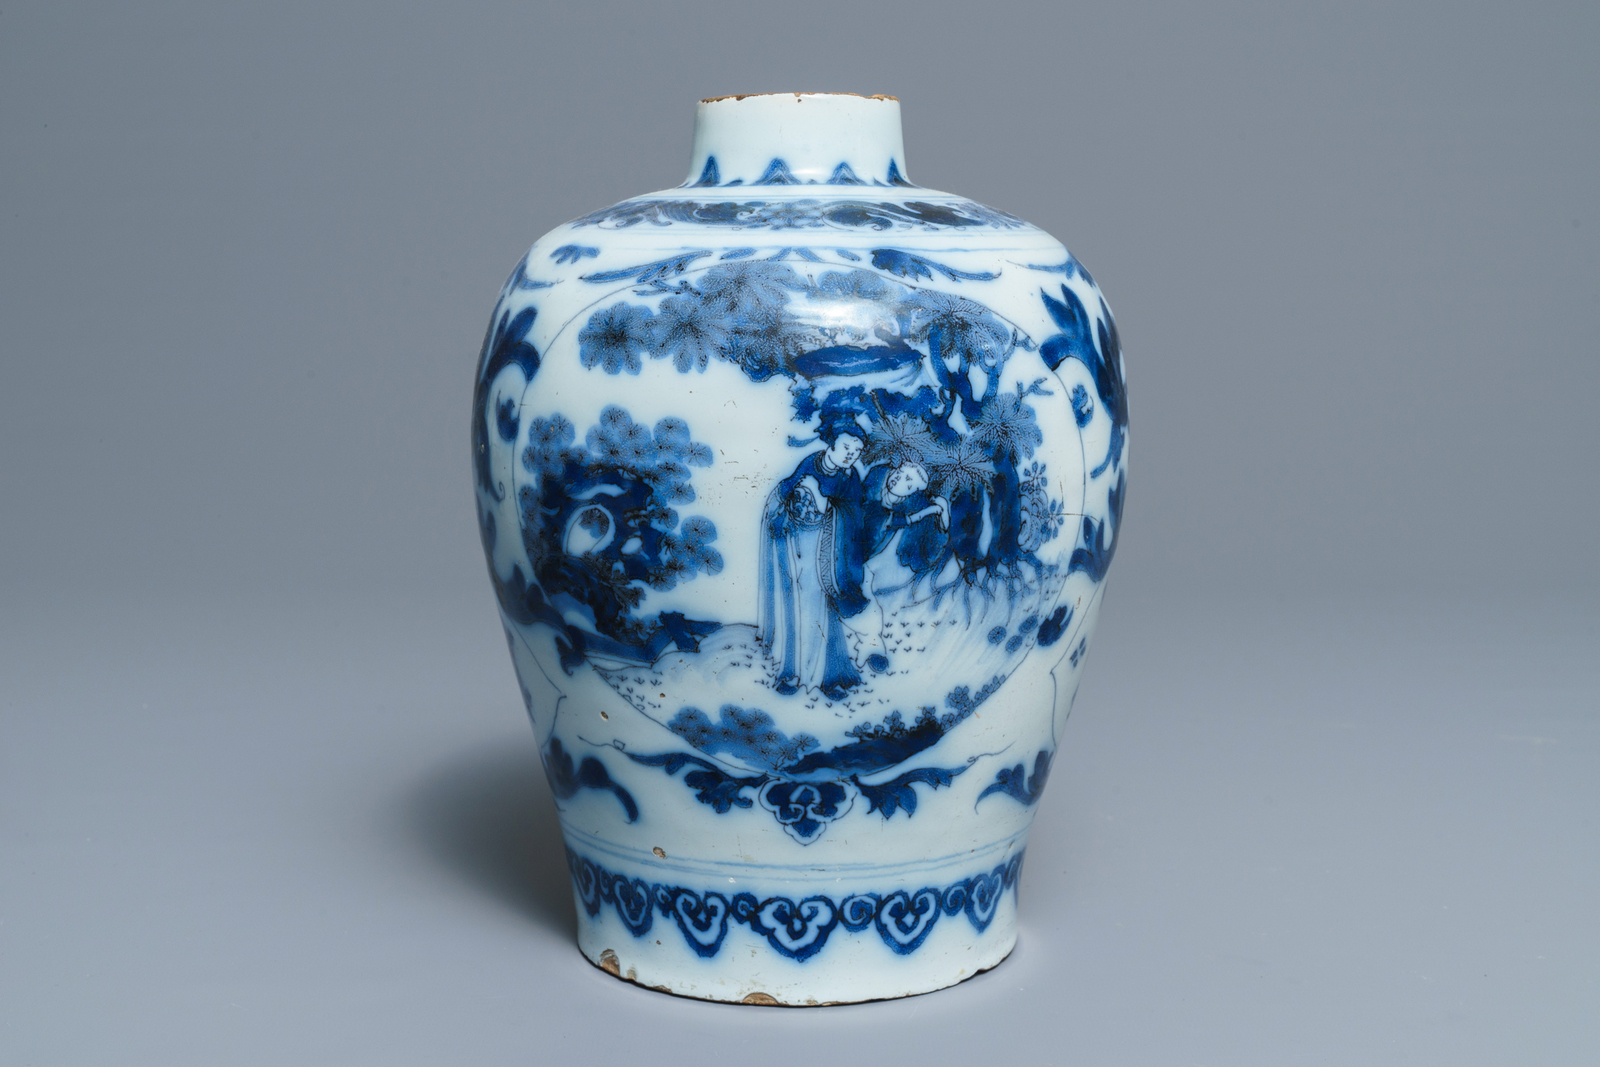 A Dutch Delft blue and white chinoiserie vase, last quarter 17th C. - Image 3 of 6